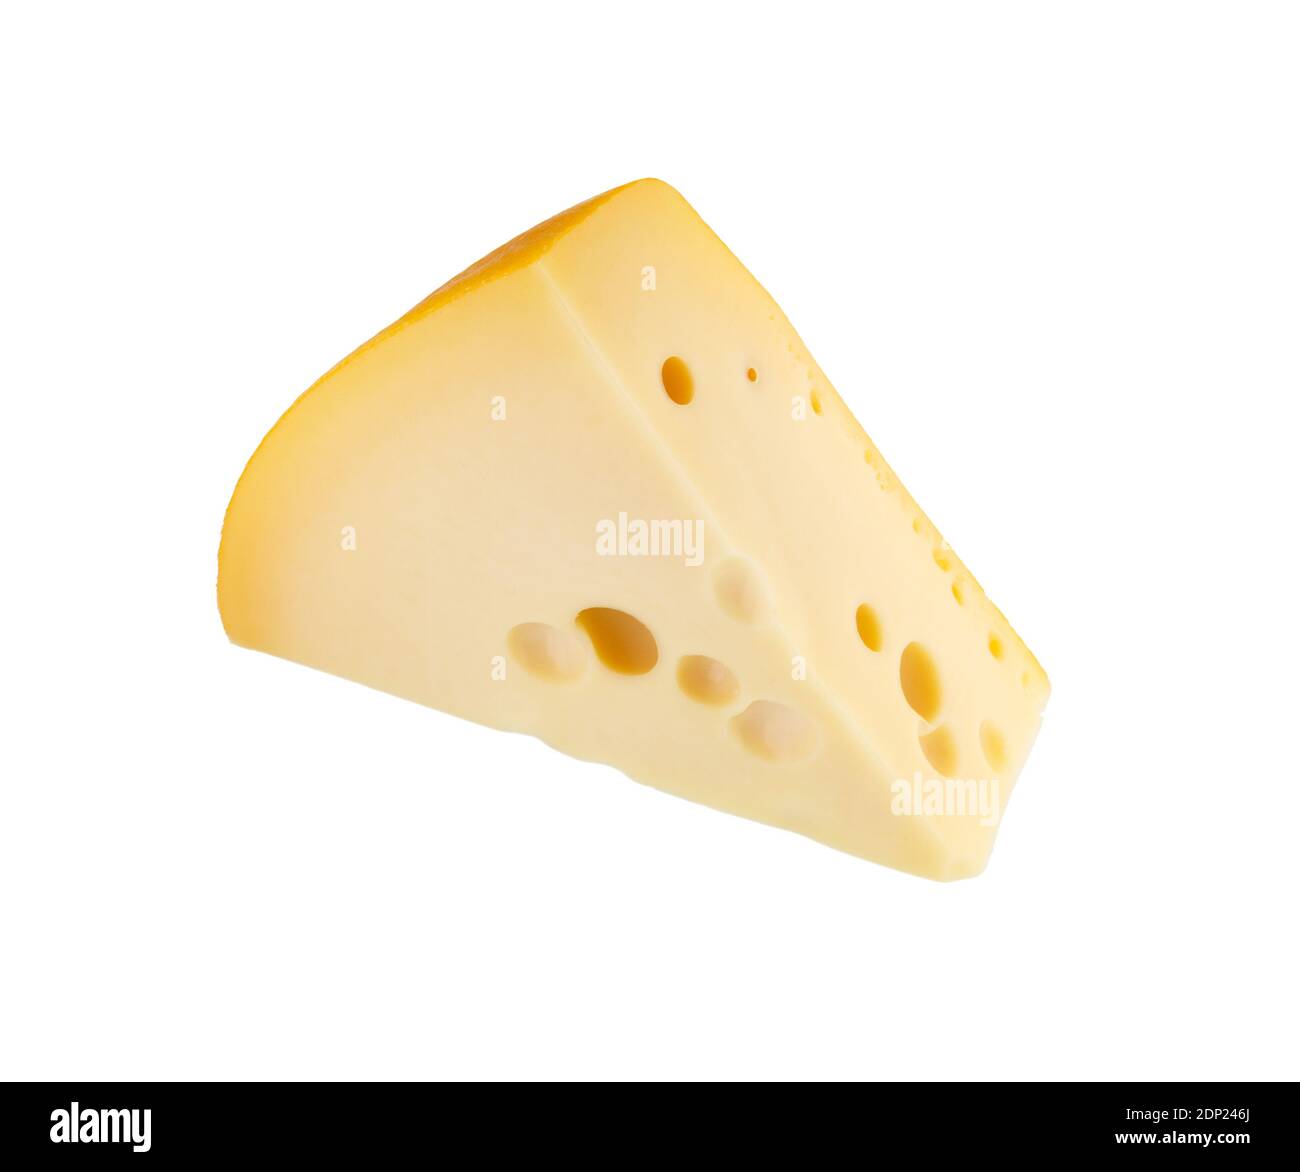 Cheese cut out. Piece of cheese isolated on white background. Stock Photo